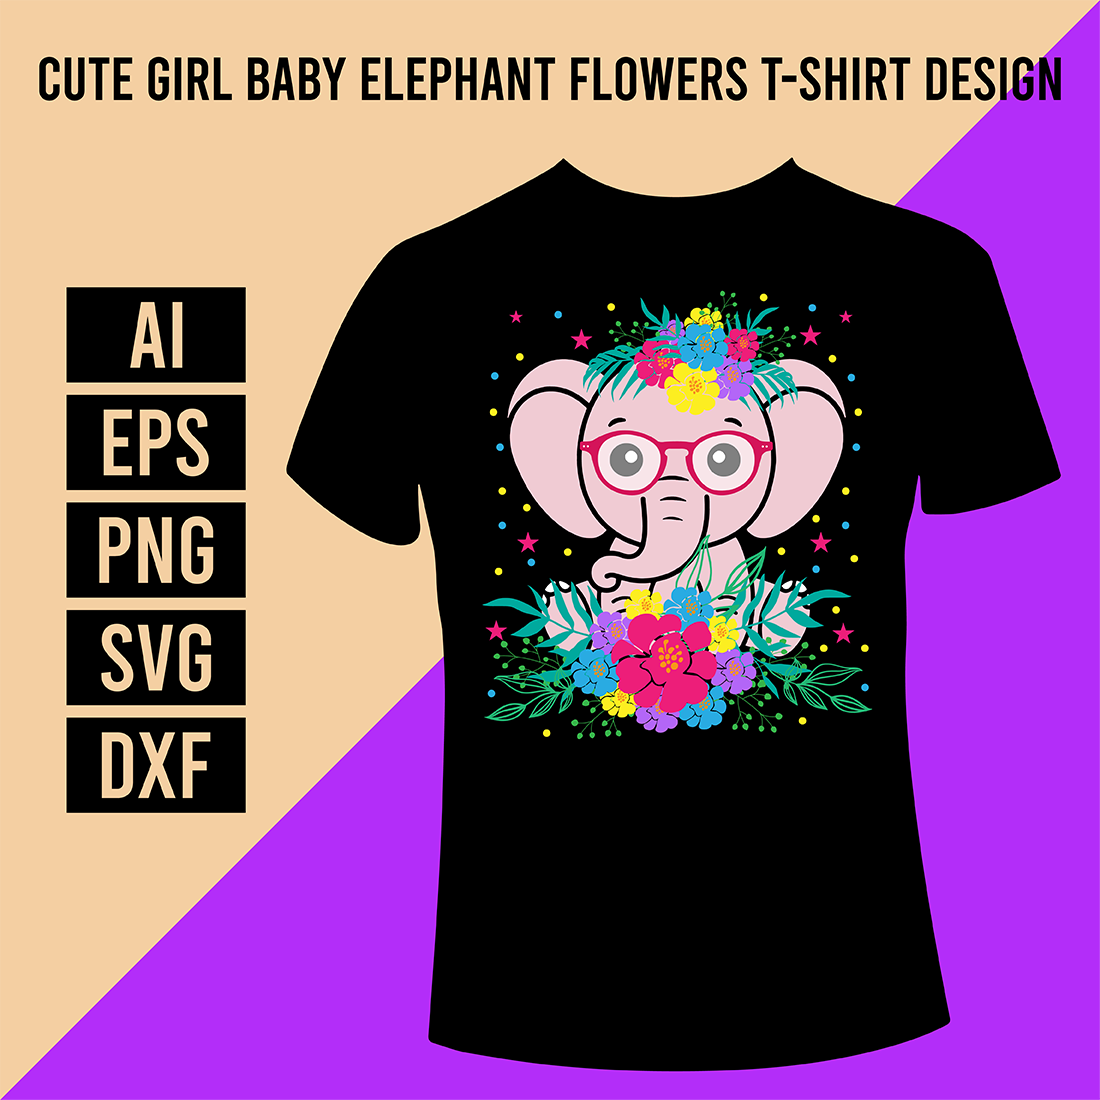 Cute Girl Baby Elephant Flowers T-Shirt Design cover image.